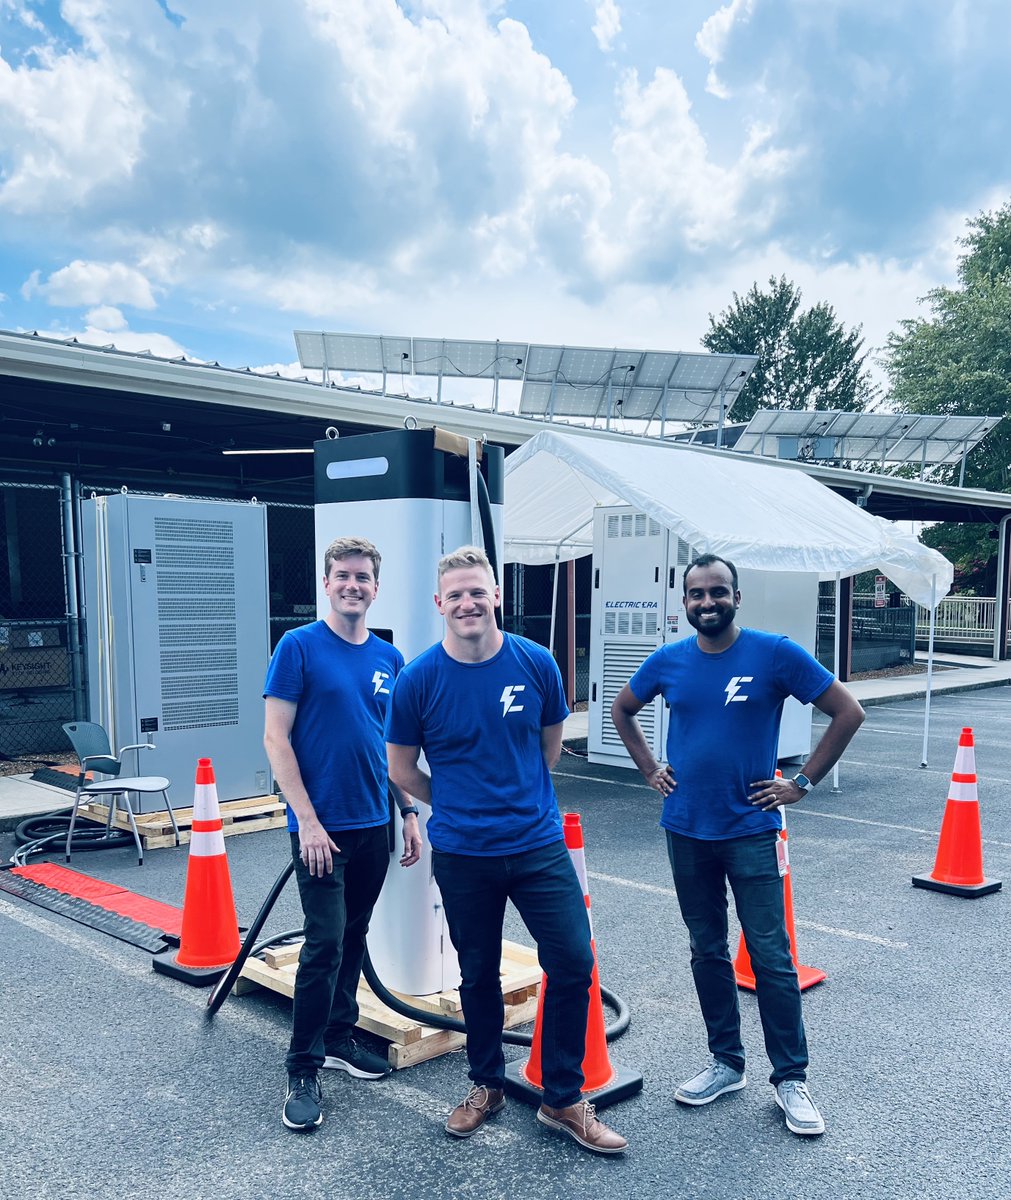 Throwback Thursday to 2022 when we deployed the first generation PowerNode Charging Station in Knoxville Tennessee with @EPRINews, @xcelenergy, and @CentralHudson 

Electric Era is committed to innovation! Over the last year we have continued to improve reliability,…